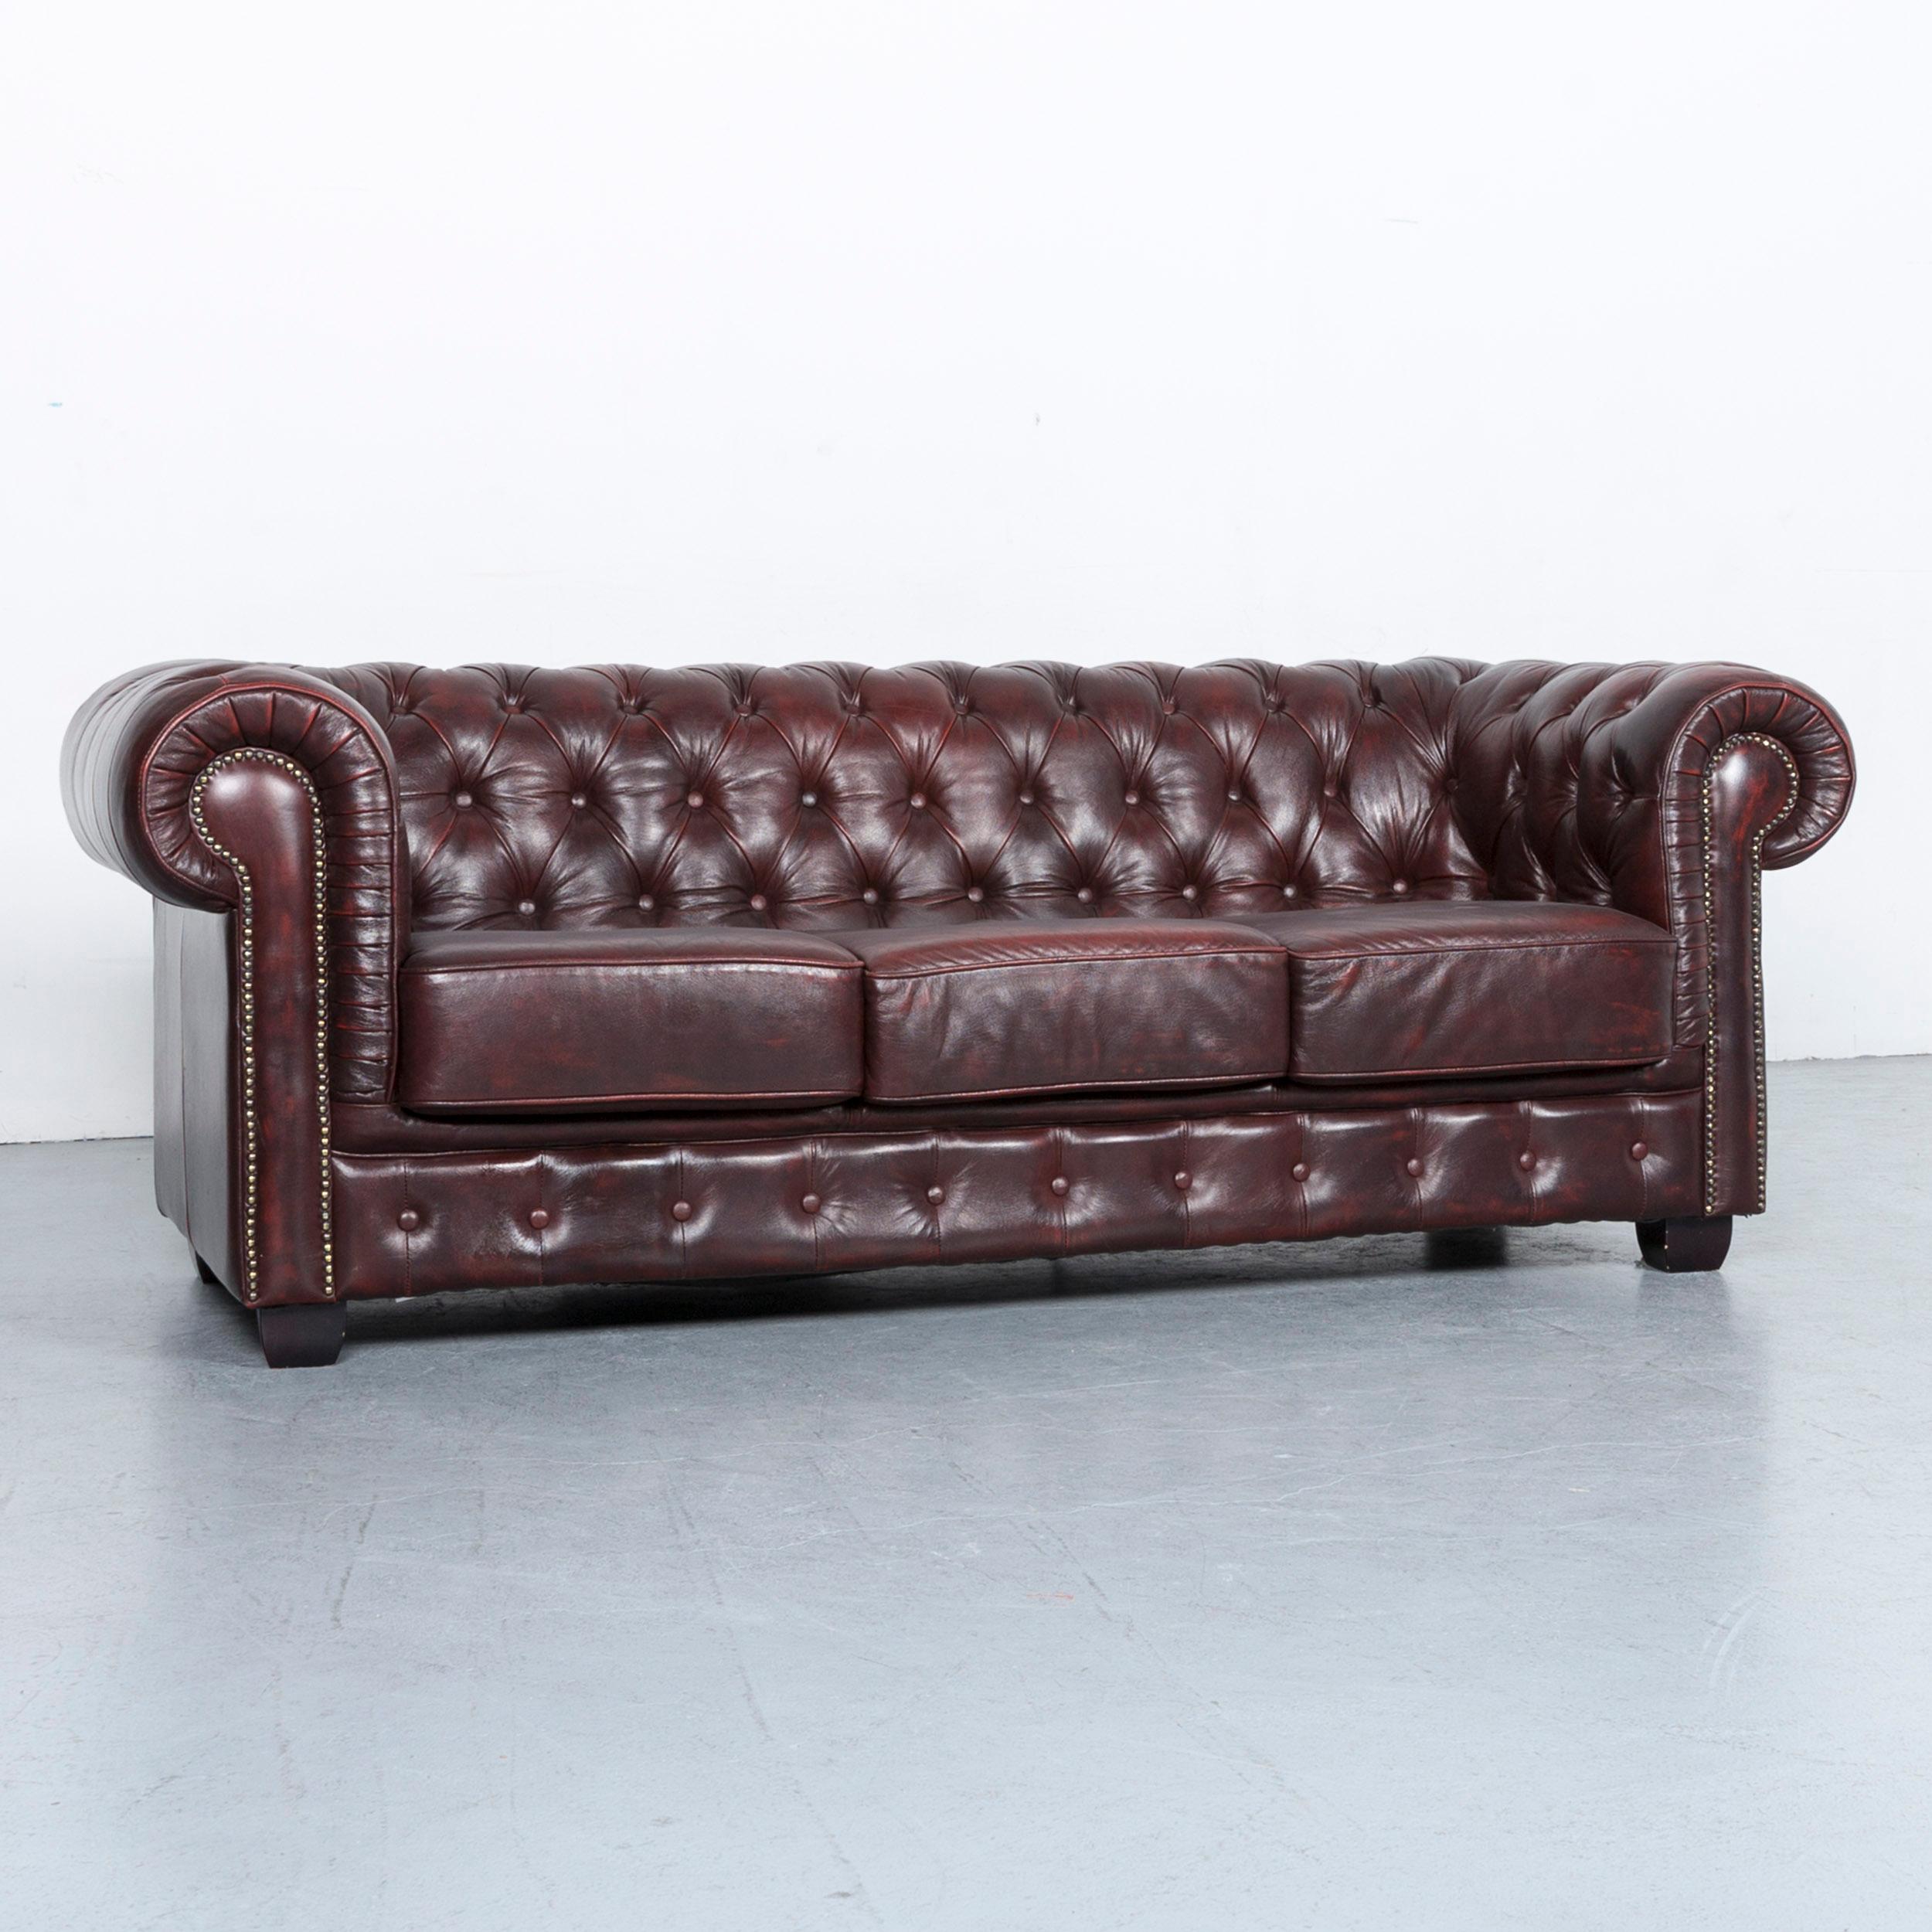 British Chesterfield Leather Sofa Brown Three-Seat Couch Vintage Retro